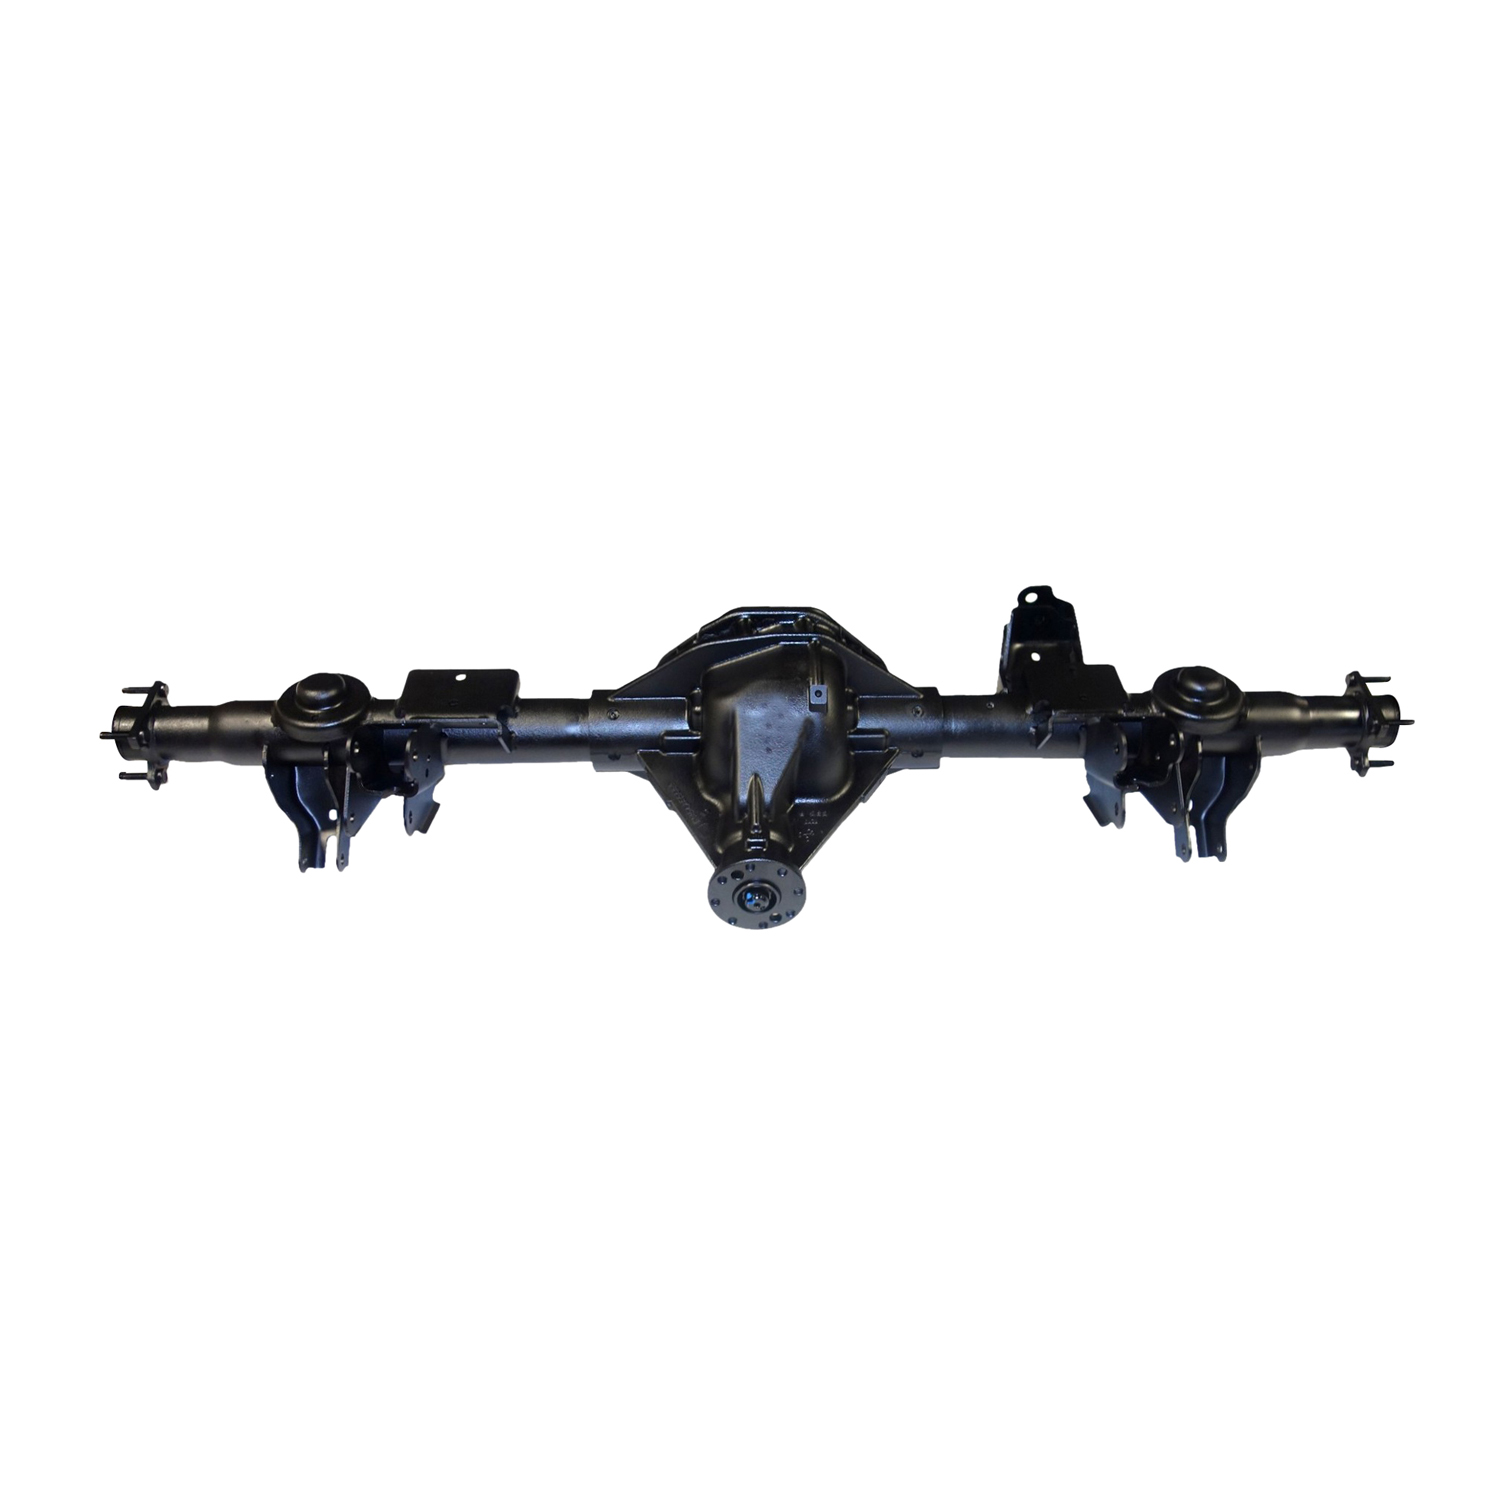 Reman Axle Assembly Chrysler 9.25ZF 2011 Dodge Ram 1500 3.21 Ratio, 2wd